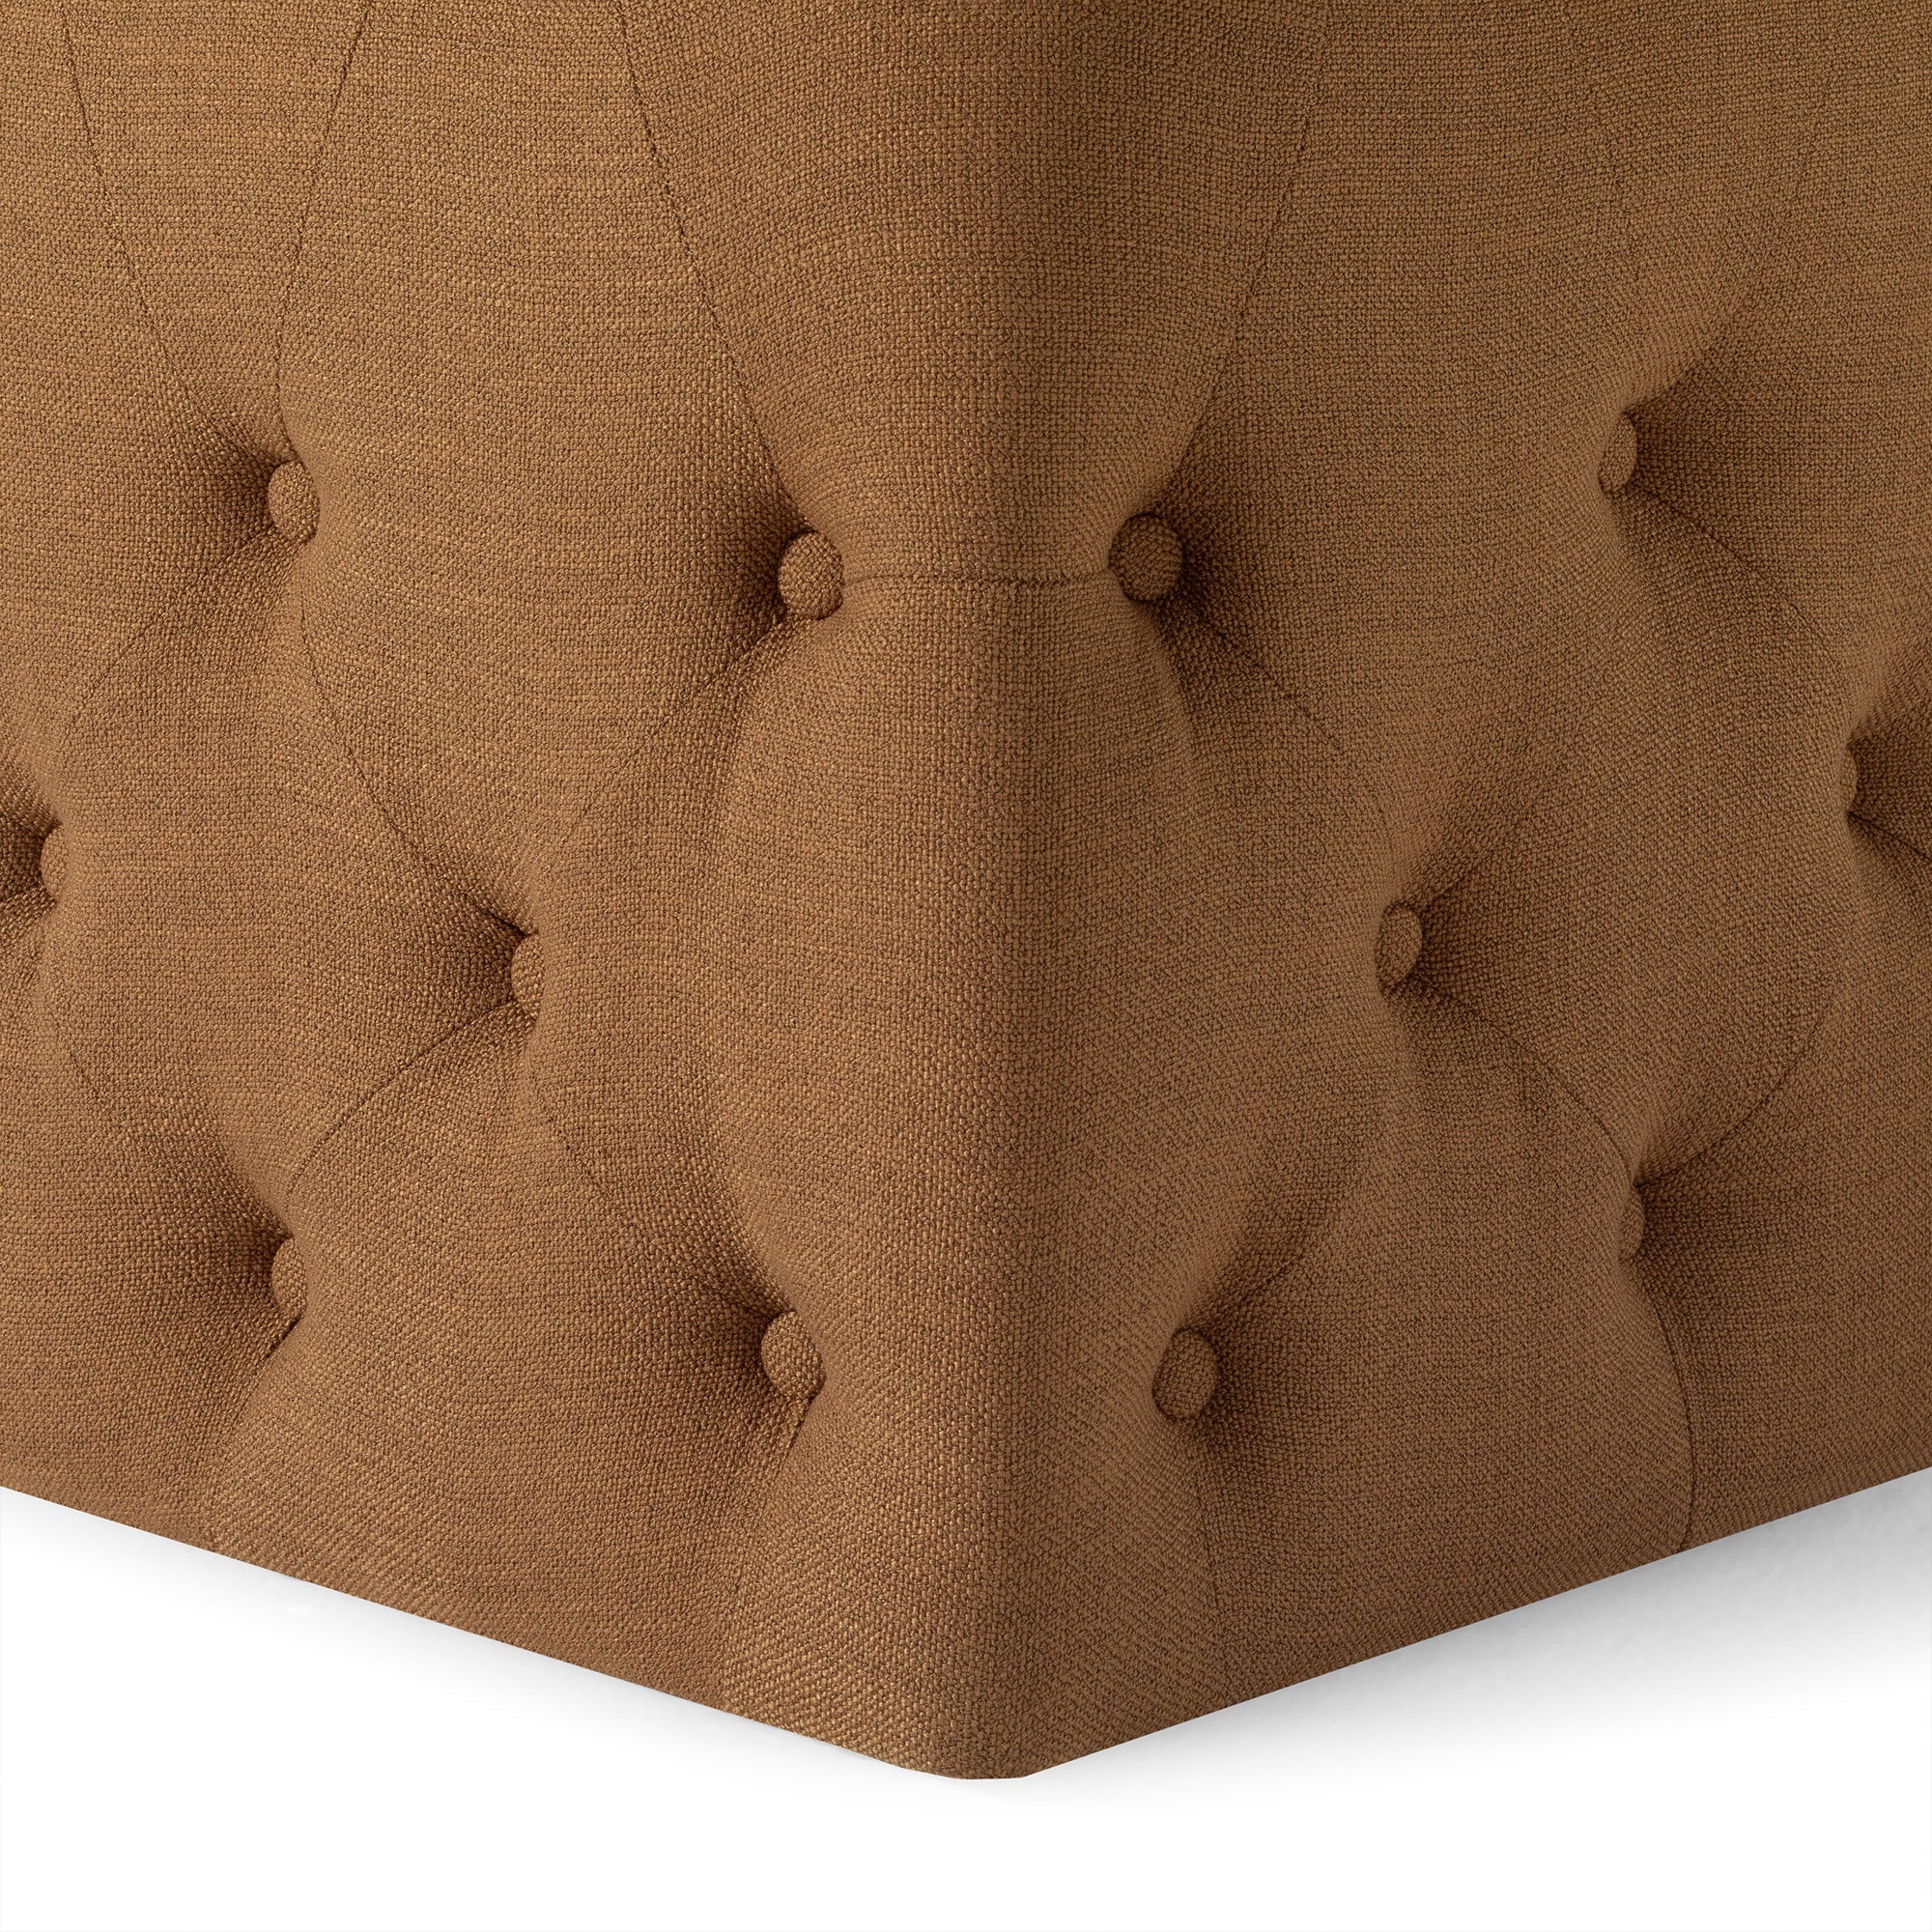 Henry Classical Ottoman in Clay Fabric Upholstery in Ottomans & Benches by Maven Lane